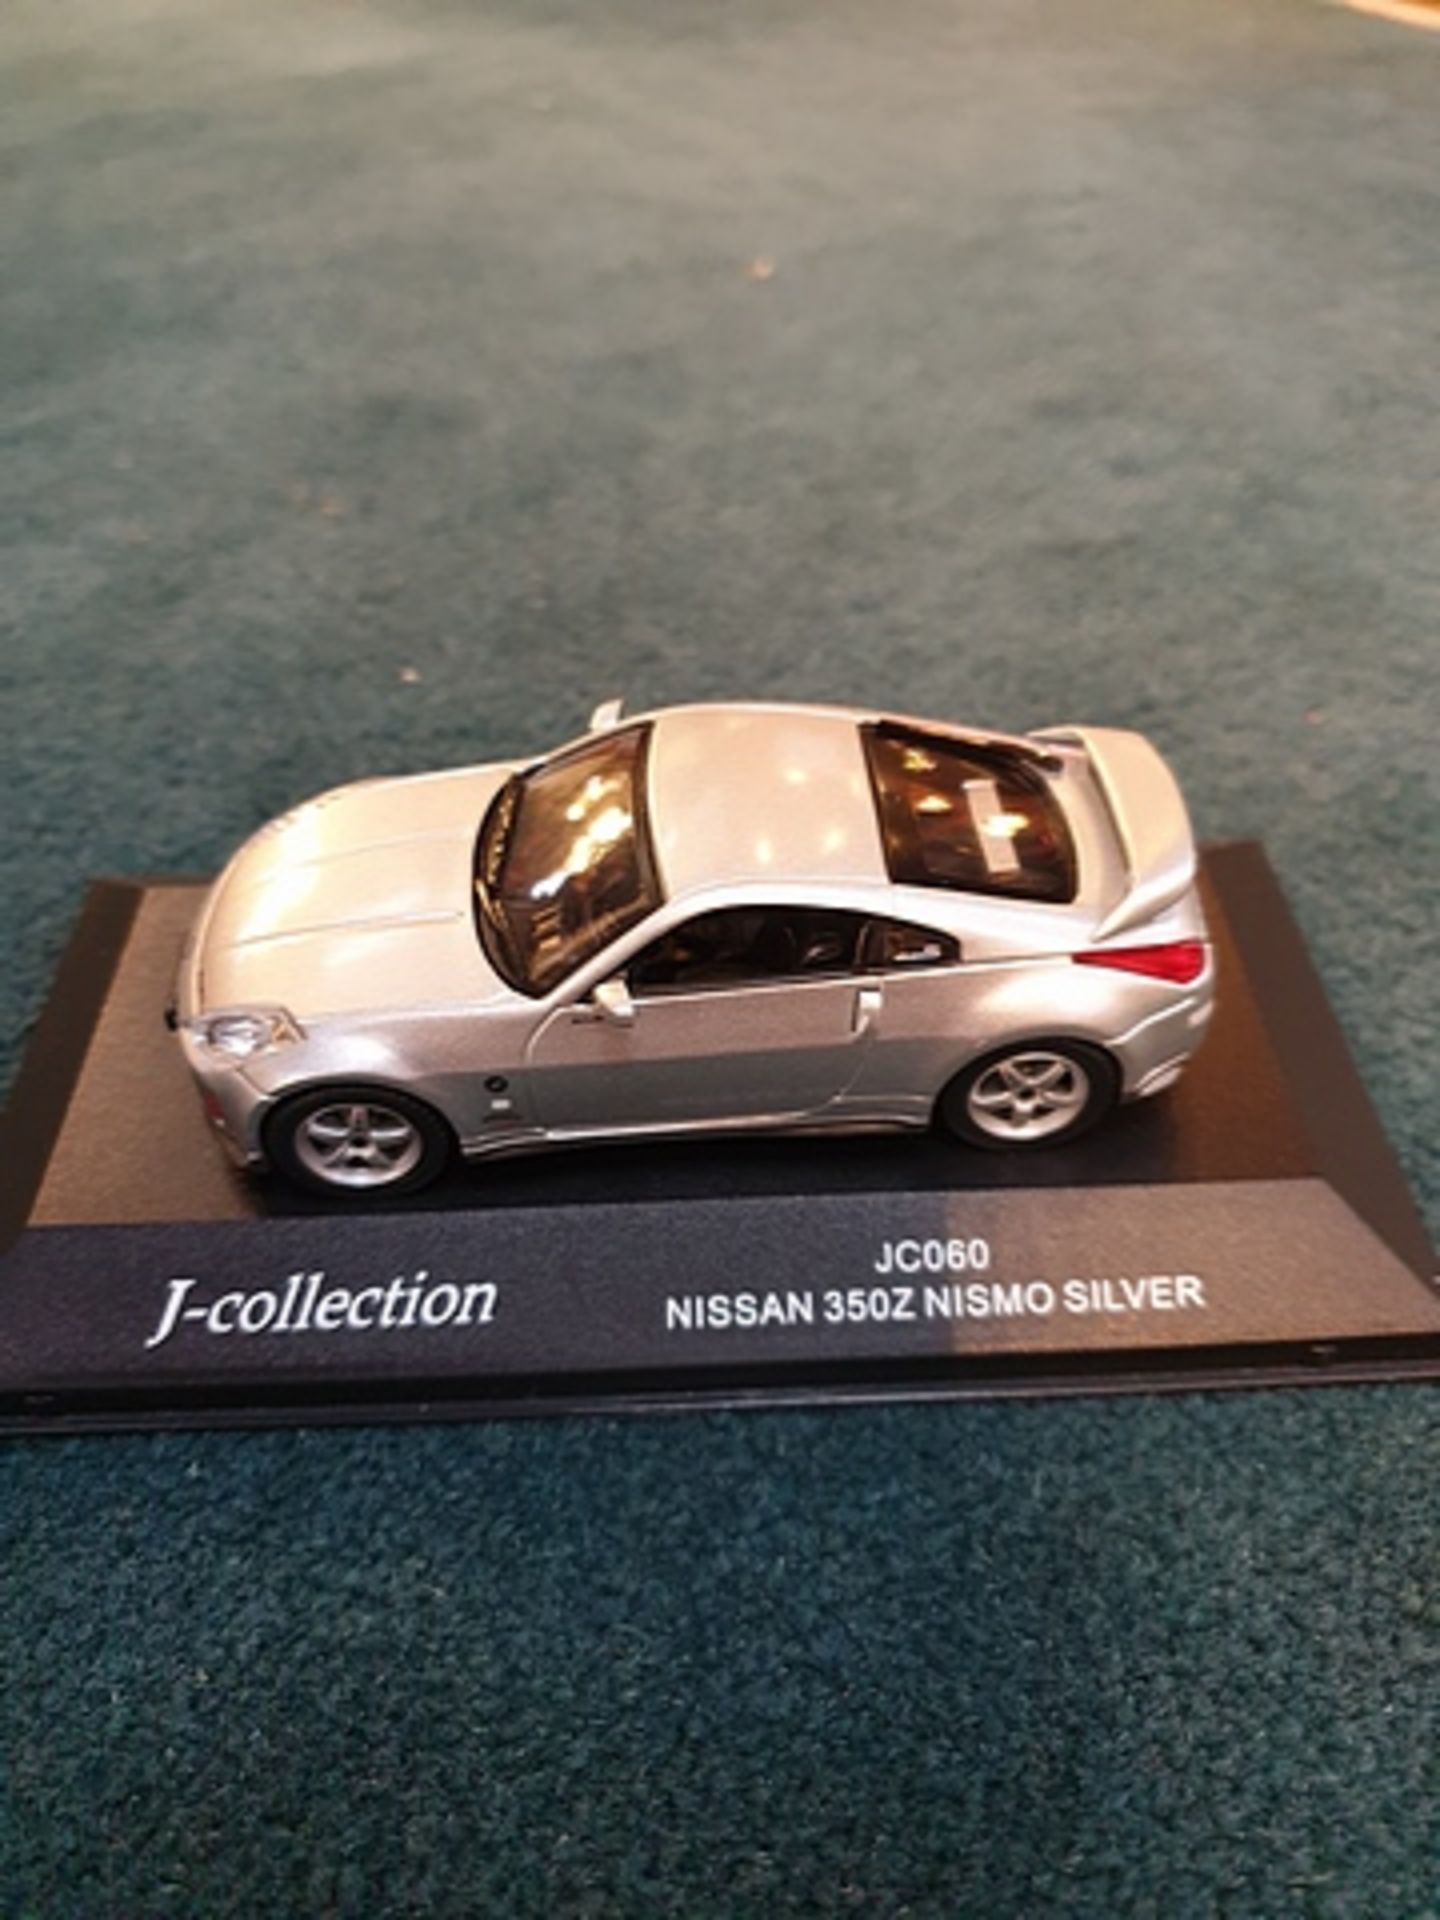 J-Collection Scale 1/43 Diecast Model JC060 Silver Nissan 350z Nismo Complete With Box - Image 2 of 2